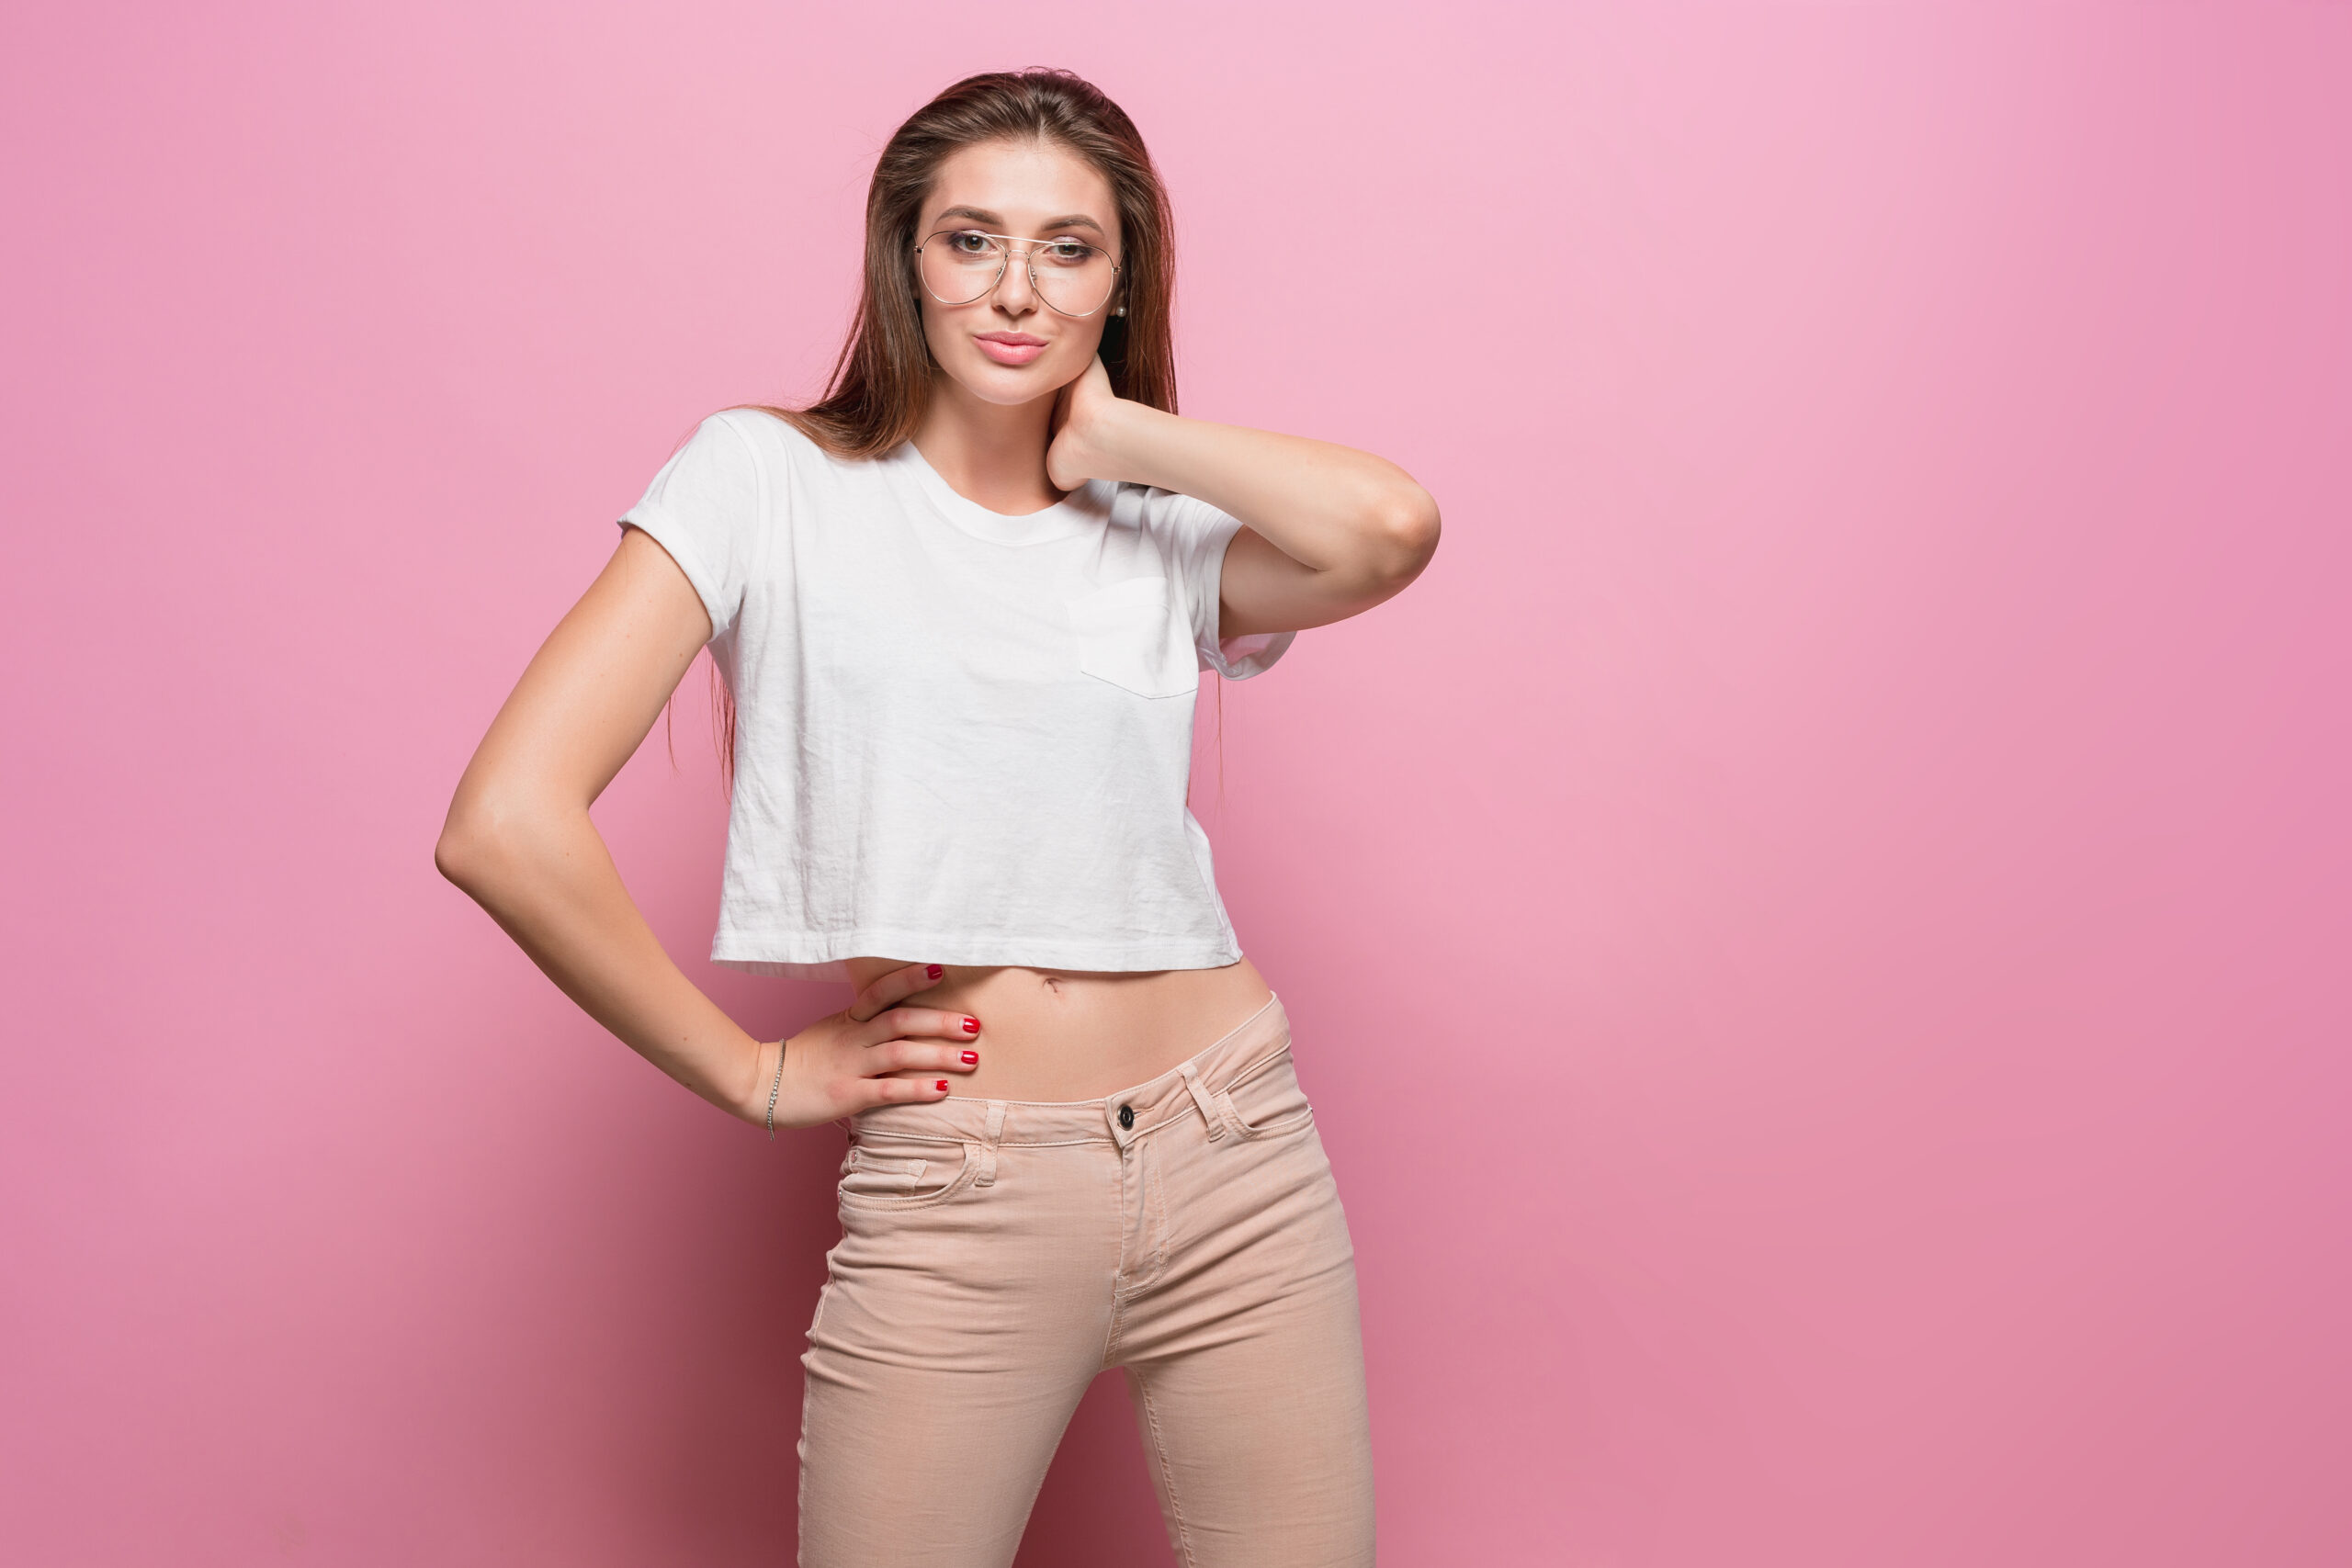 pretty-young-sexy-fashion-sensual-woman-posing-pink-background-dressed-hipster-style-jeans